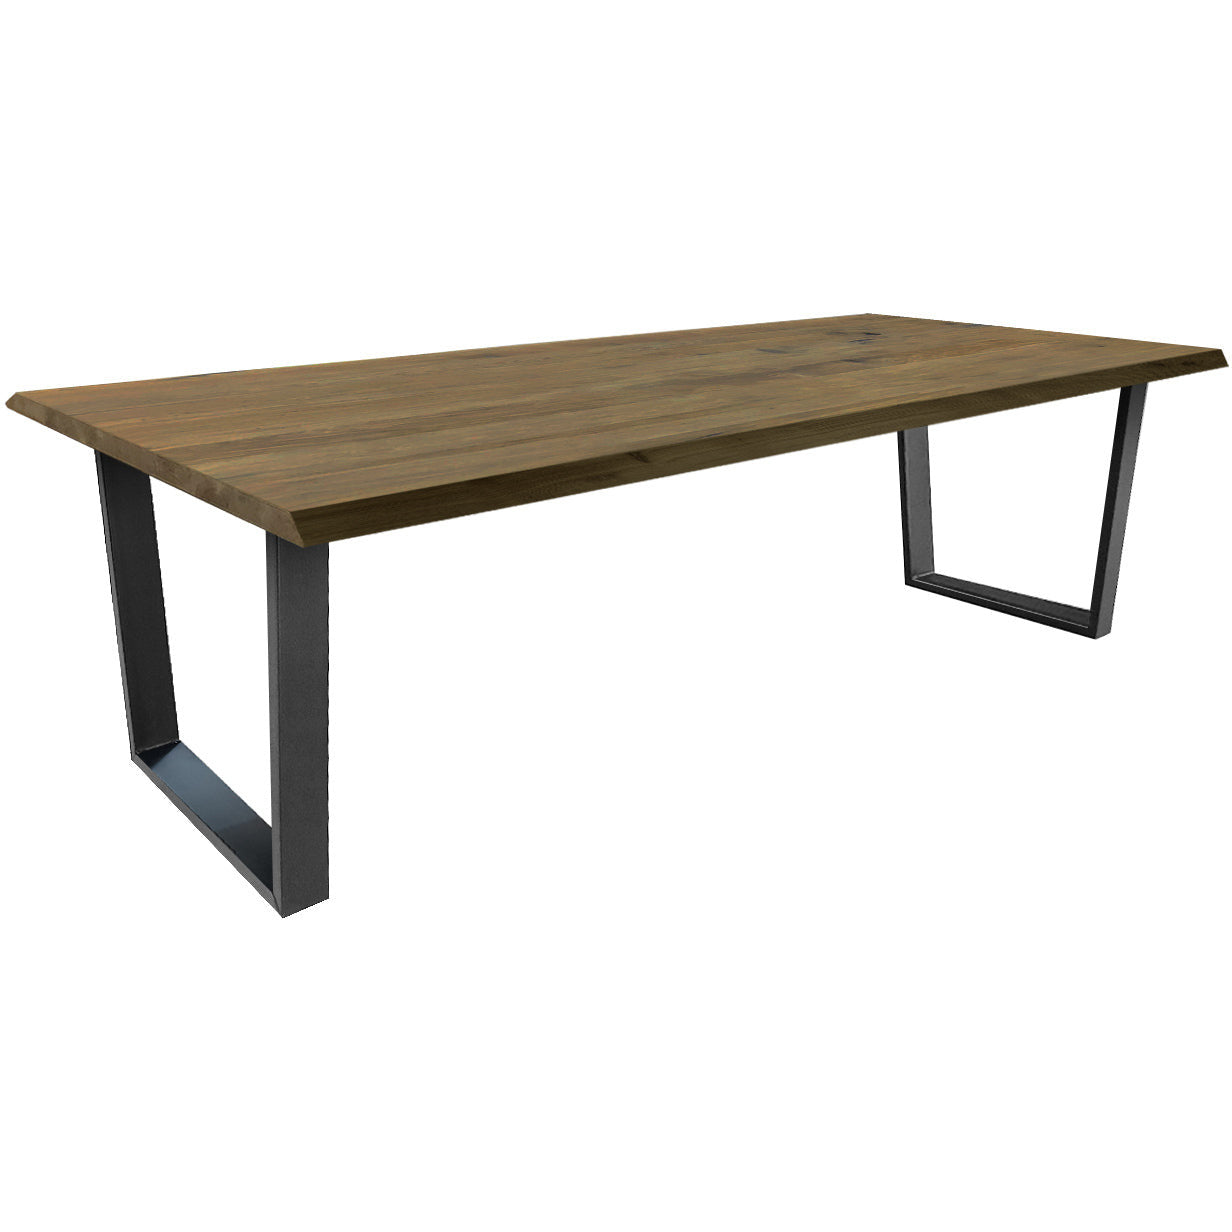 Dining table | Rectangle | Warm brown | Oak wood | Lacquered | U-leg